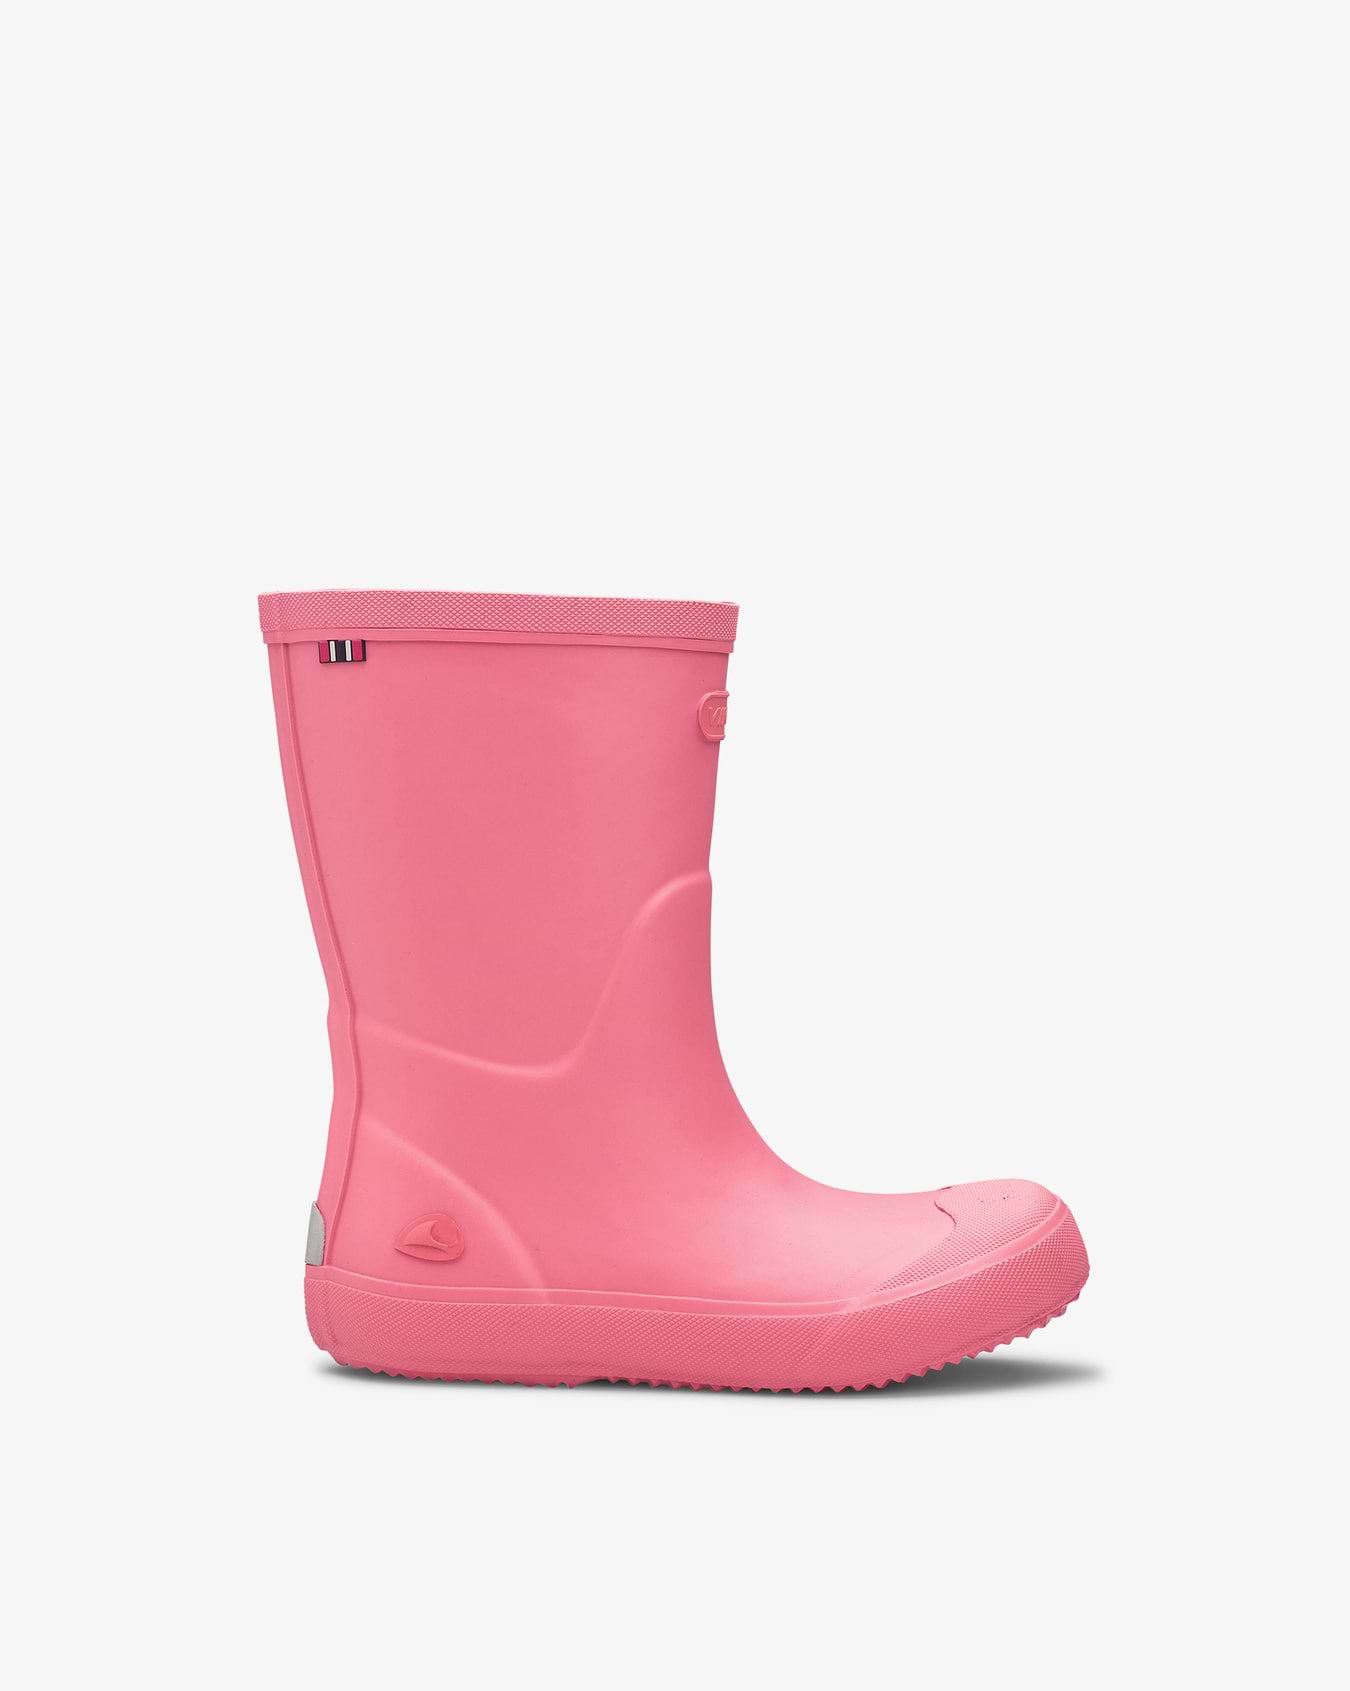 Indie Active Pink Rubber Boot